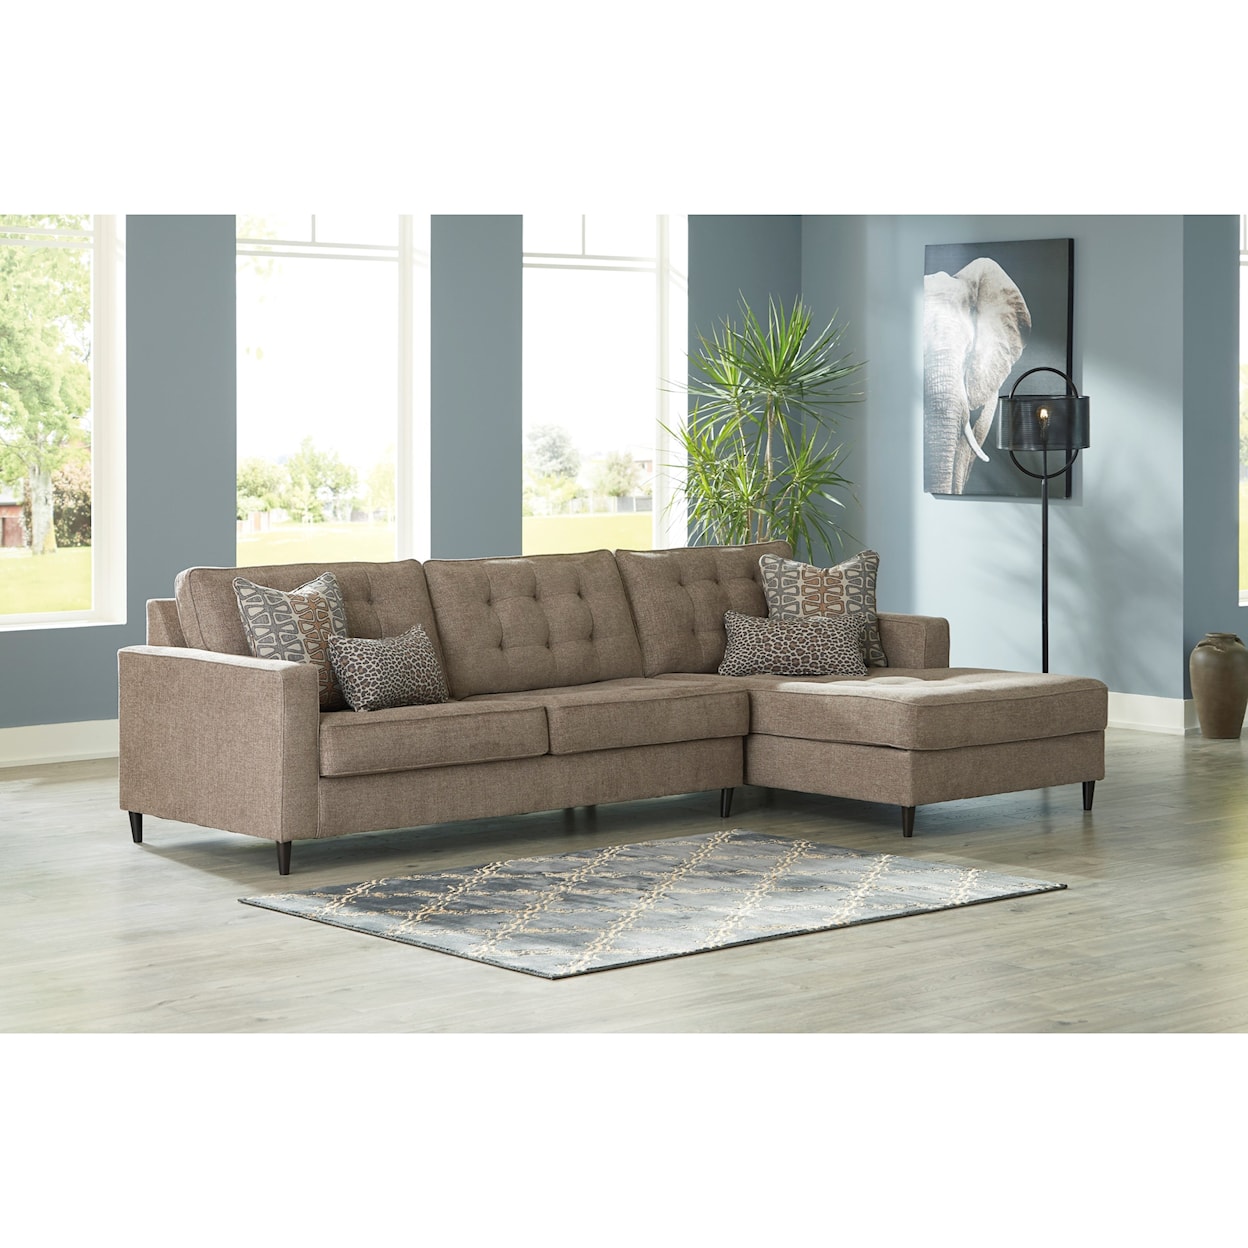 Signature Design by Ashley Furniture Flintshire 3 Seat Sectional Sofa w/ RAF Chaise